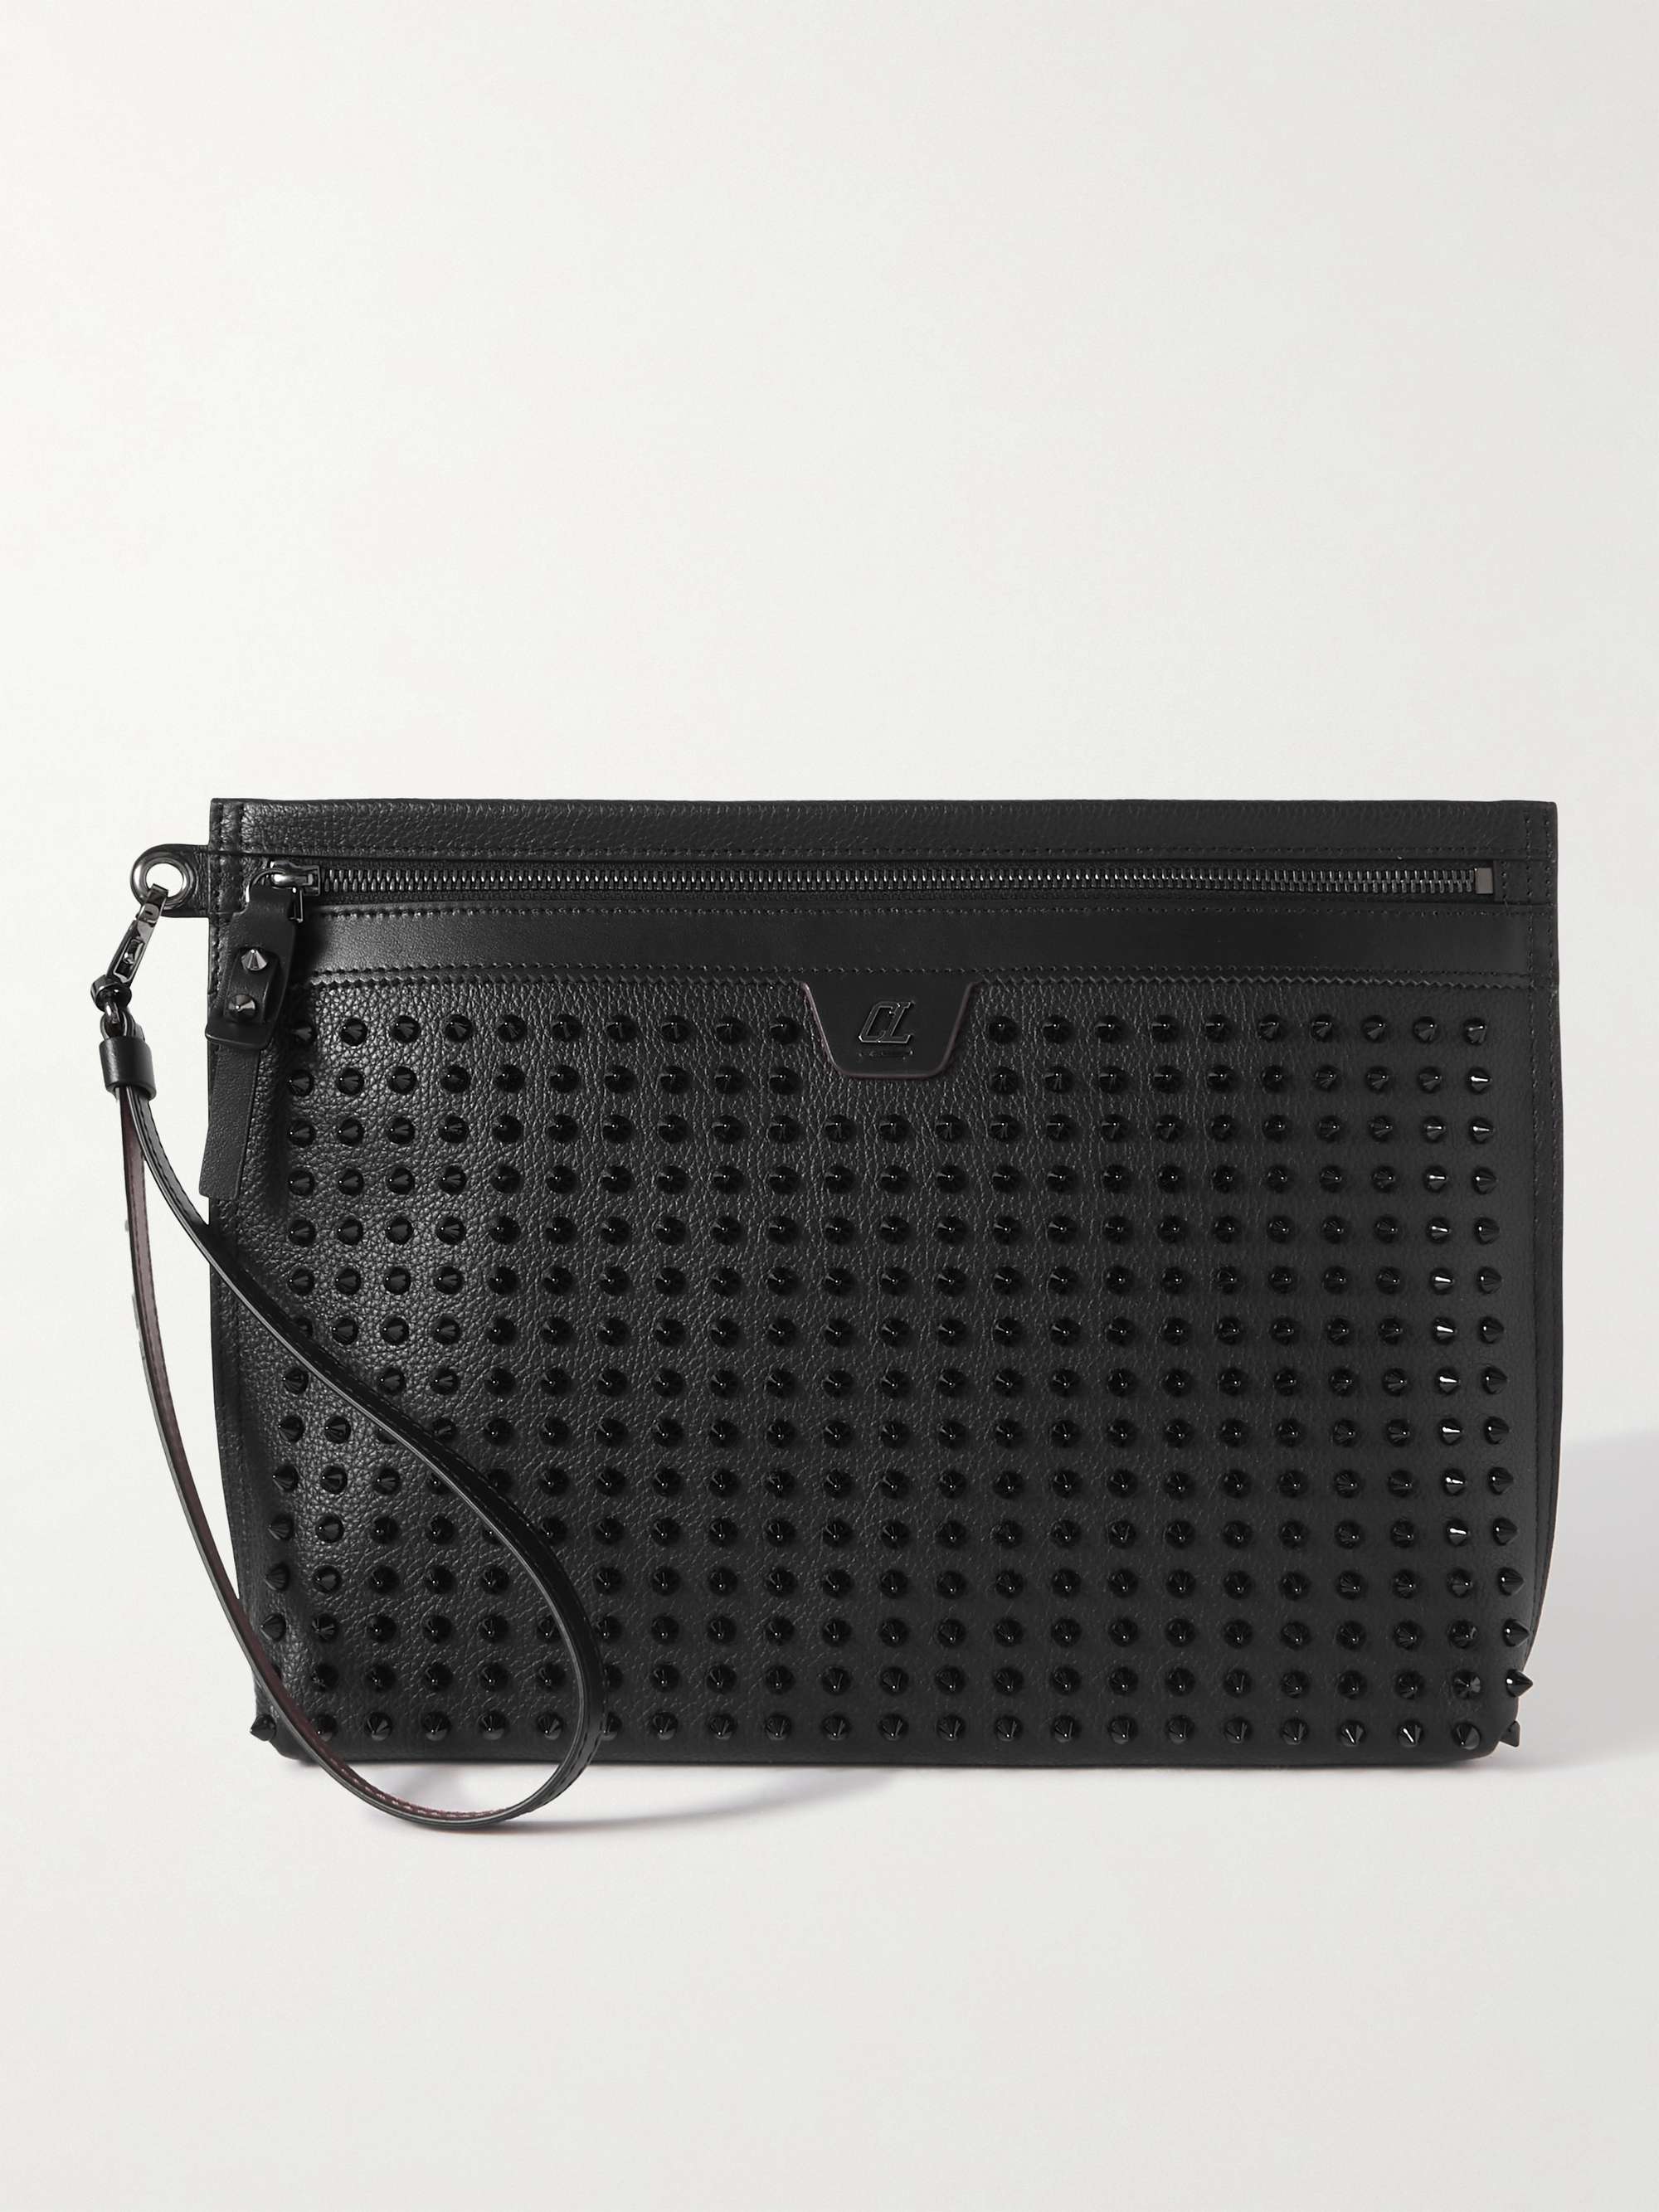 CHRISTIAN LOUBOUTIN City Spiked Full-Grain Leather Pouch